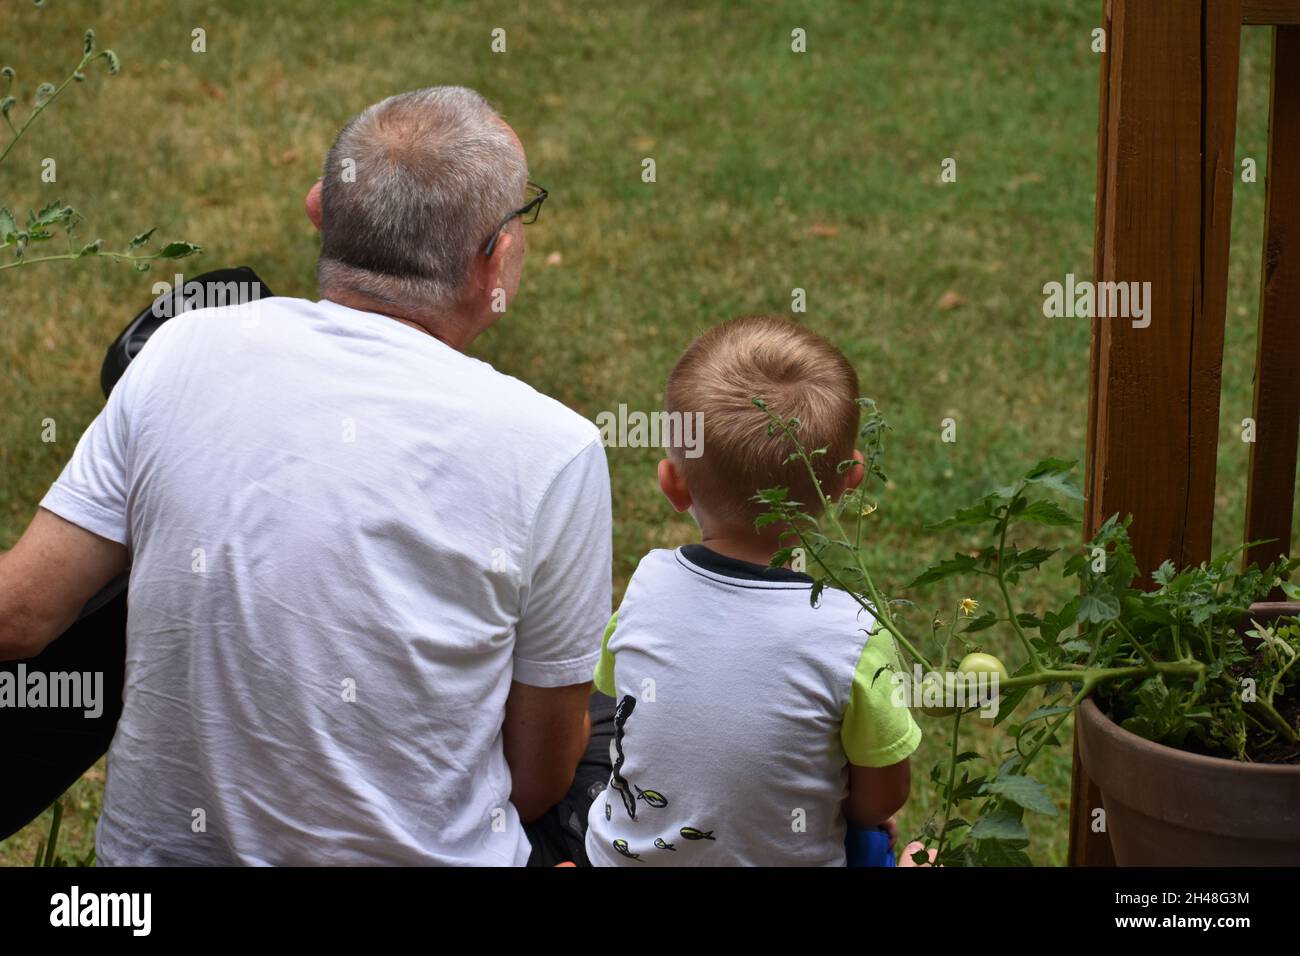 Grandfather and grandson sharing quality time during pandemic in backyard Stock Photo